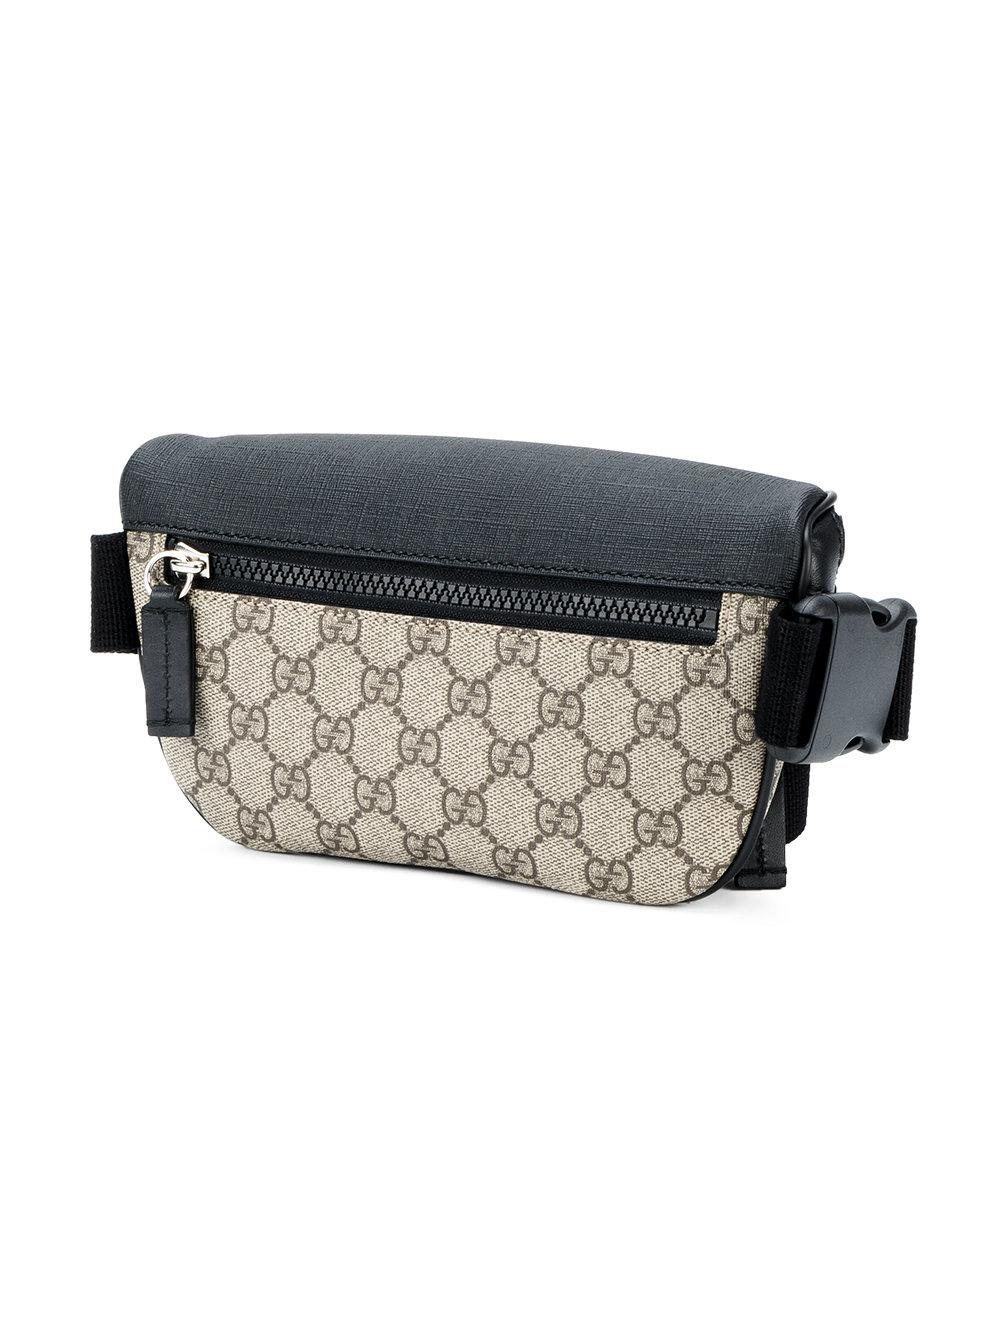 Gucci Gg Supreme Cross-body Bag in Brown for Men - Lyst